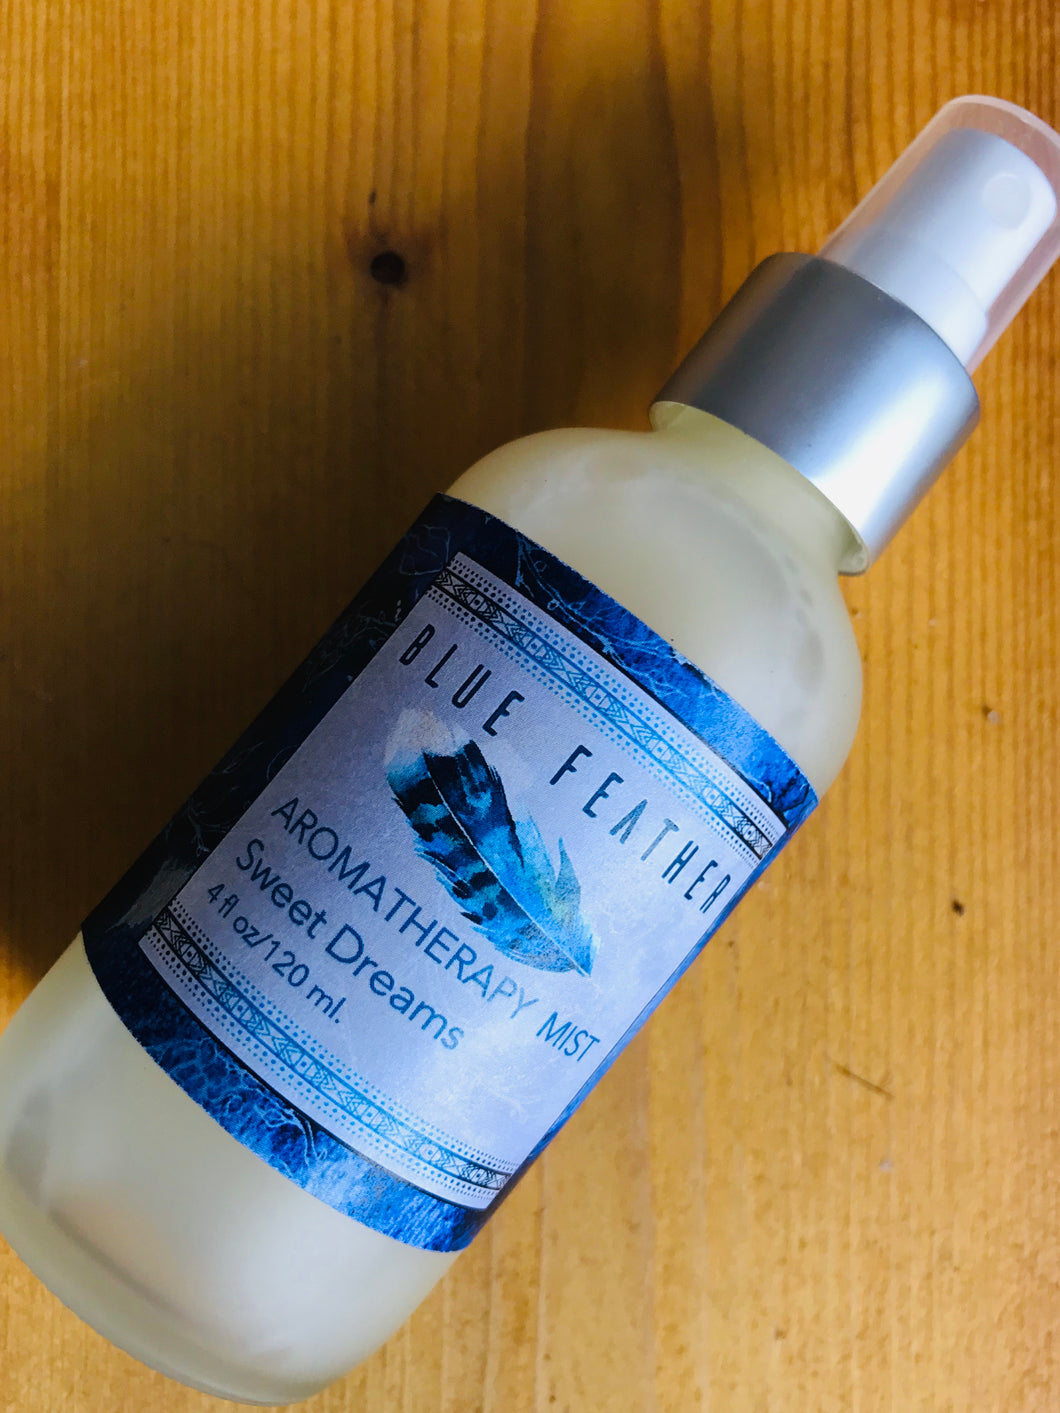 Sweet Dreams Aromatherapy Mist in Frosted Glass